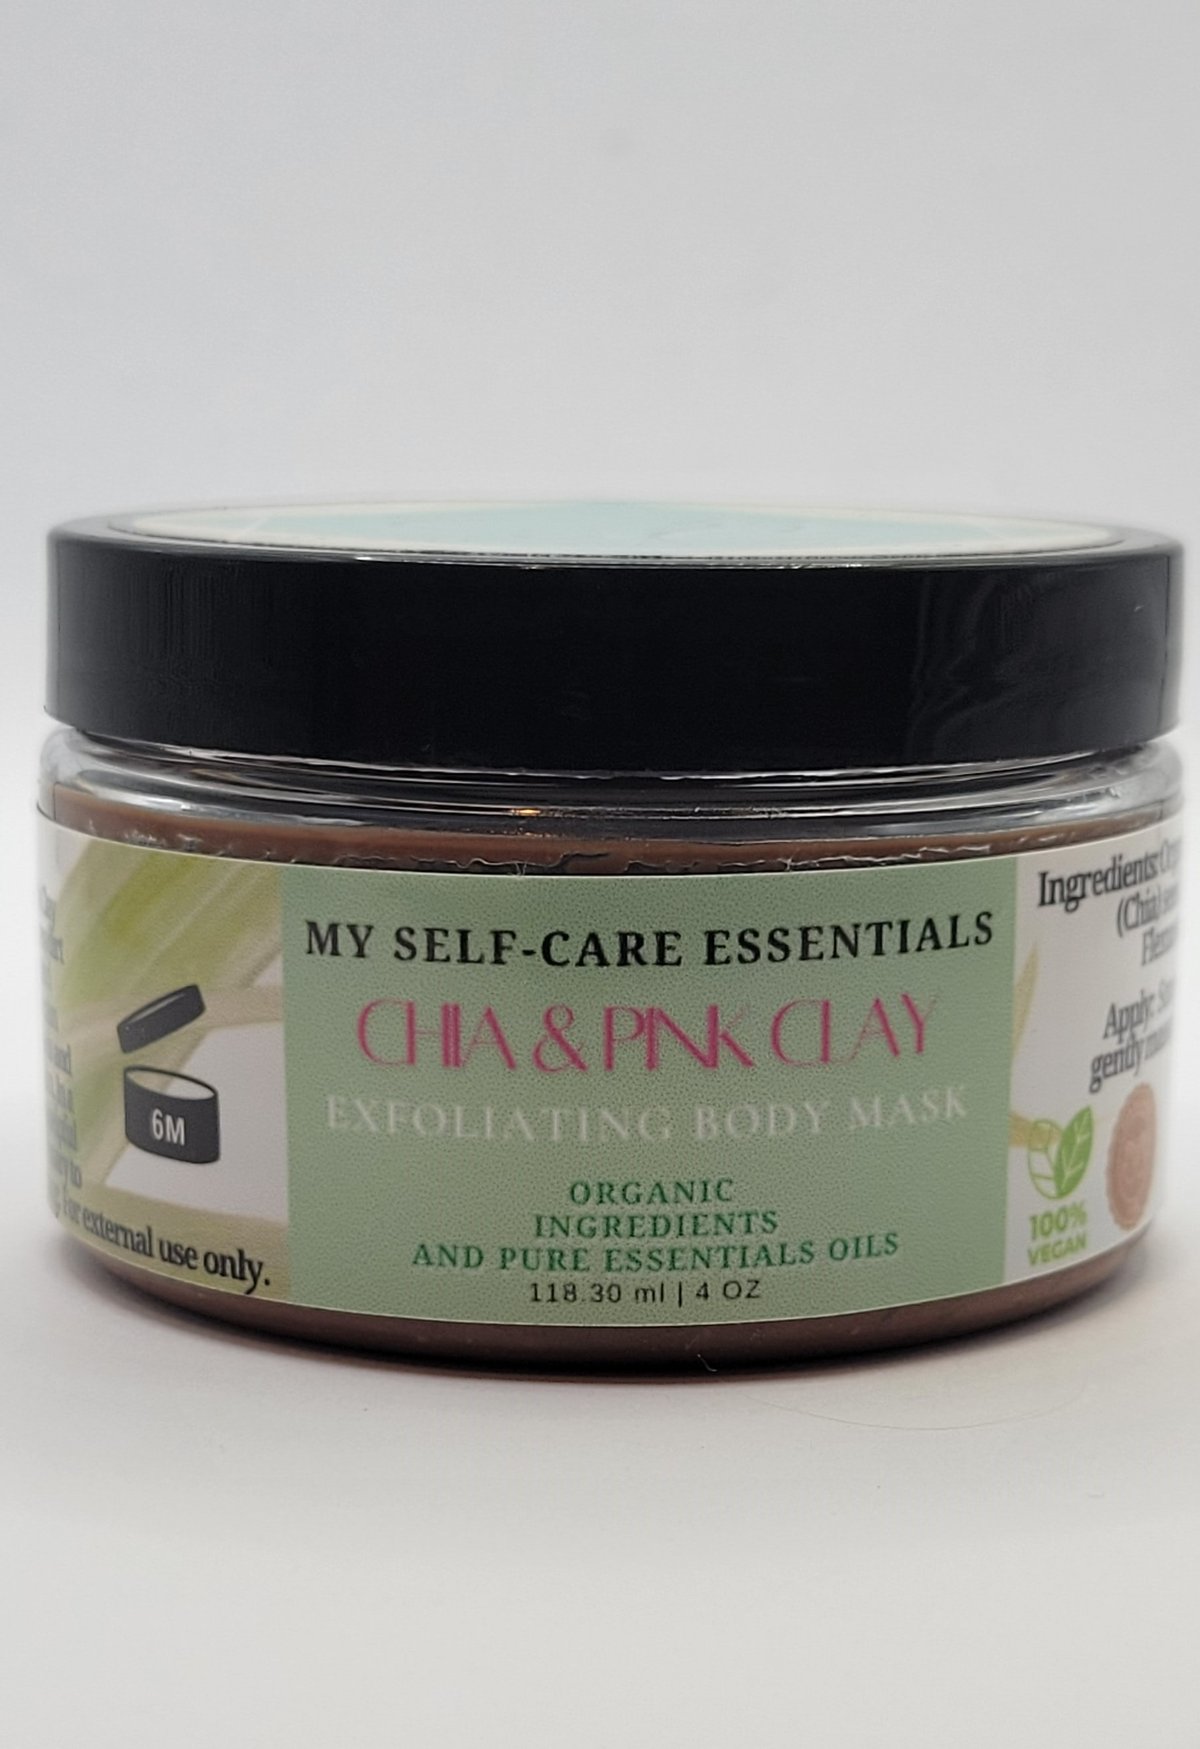 Image of Chia & Pink Clay - Exfoliating Body Mask